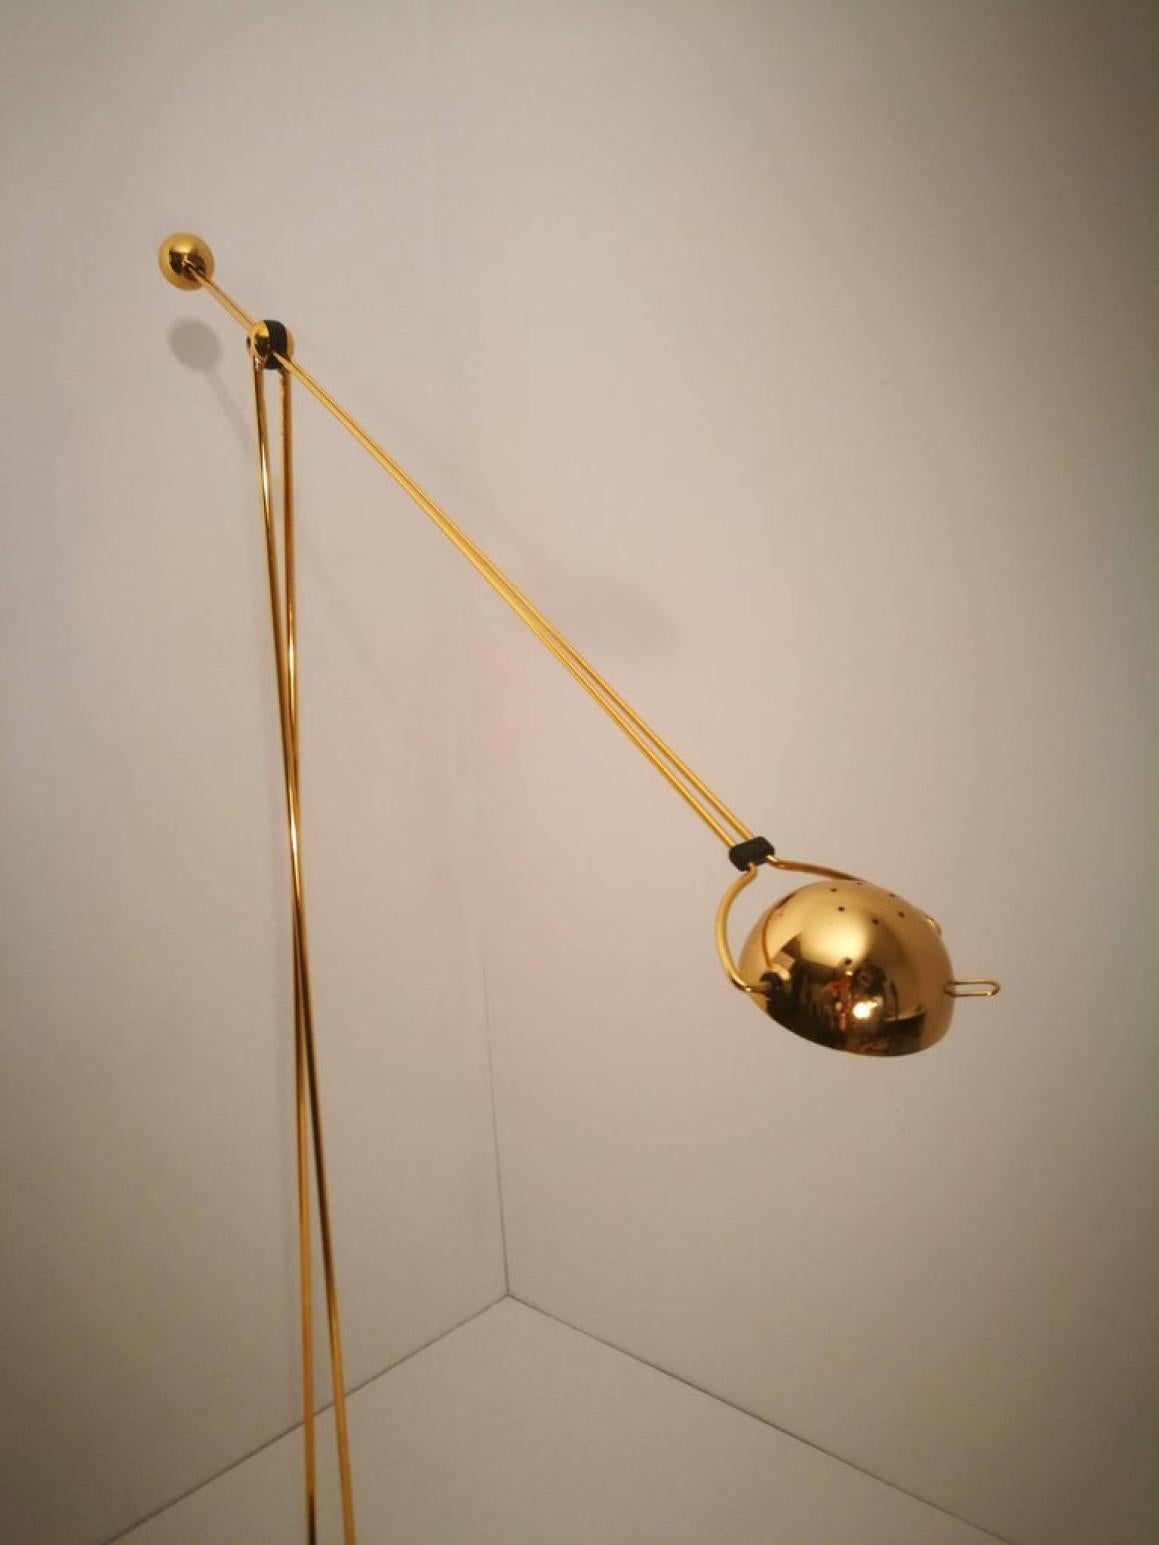 Halogen Floor and Table Lamp from Stephano Cevoli Gold-Plated, 1980s, Italy For Sale 2